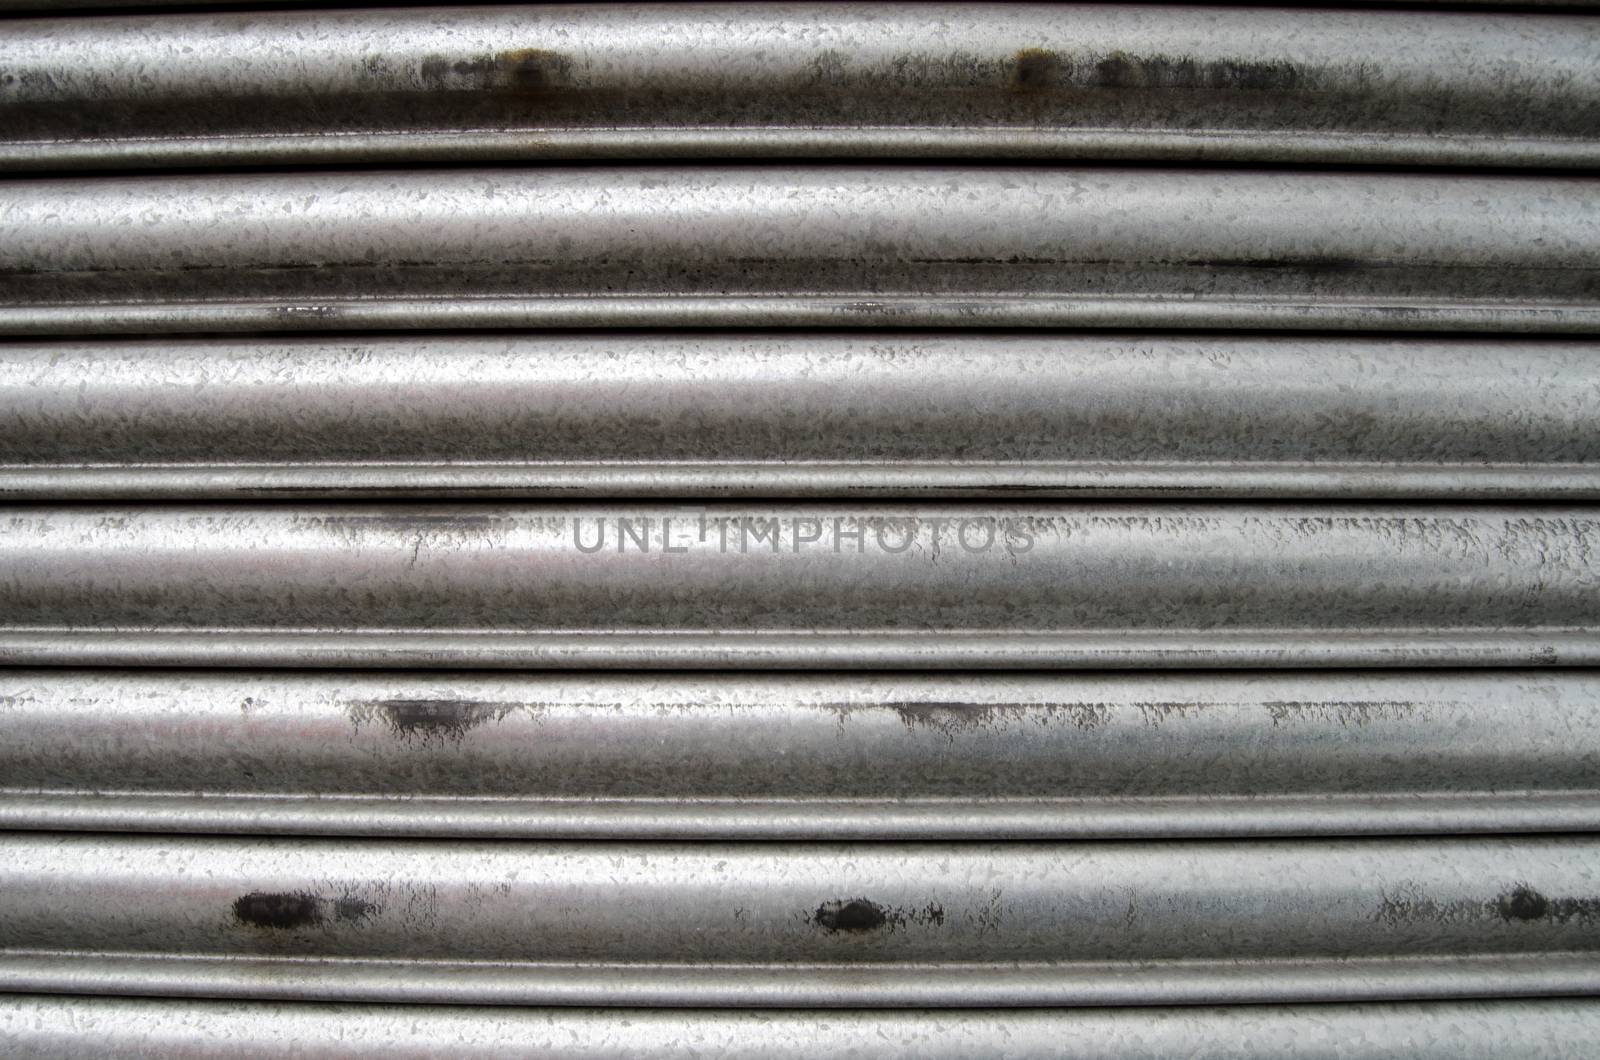 Detail of a closed metal security shutter.  Suitable for use as grunge background or wallpaper.